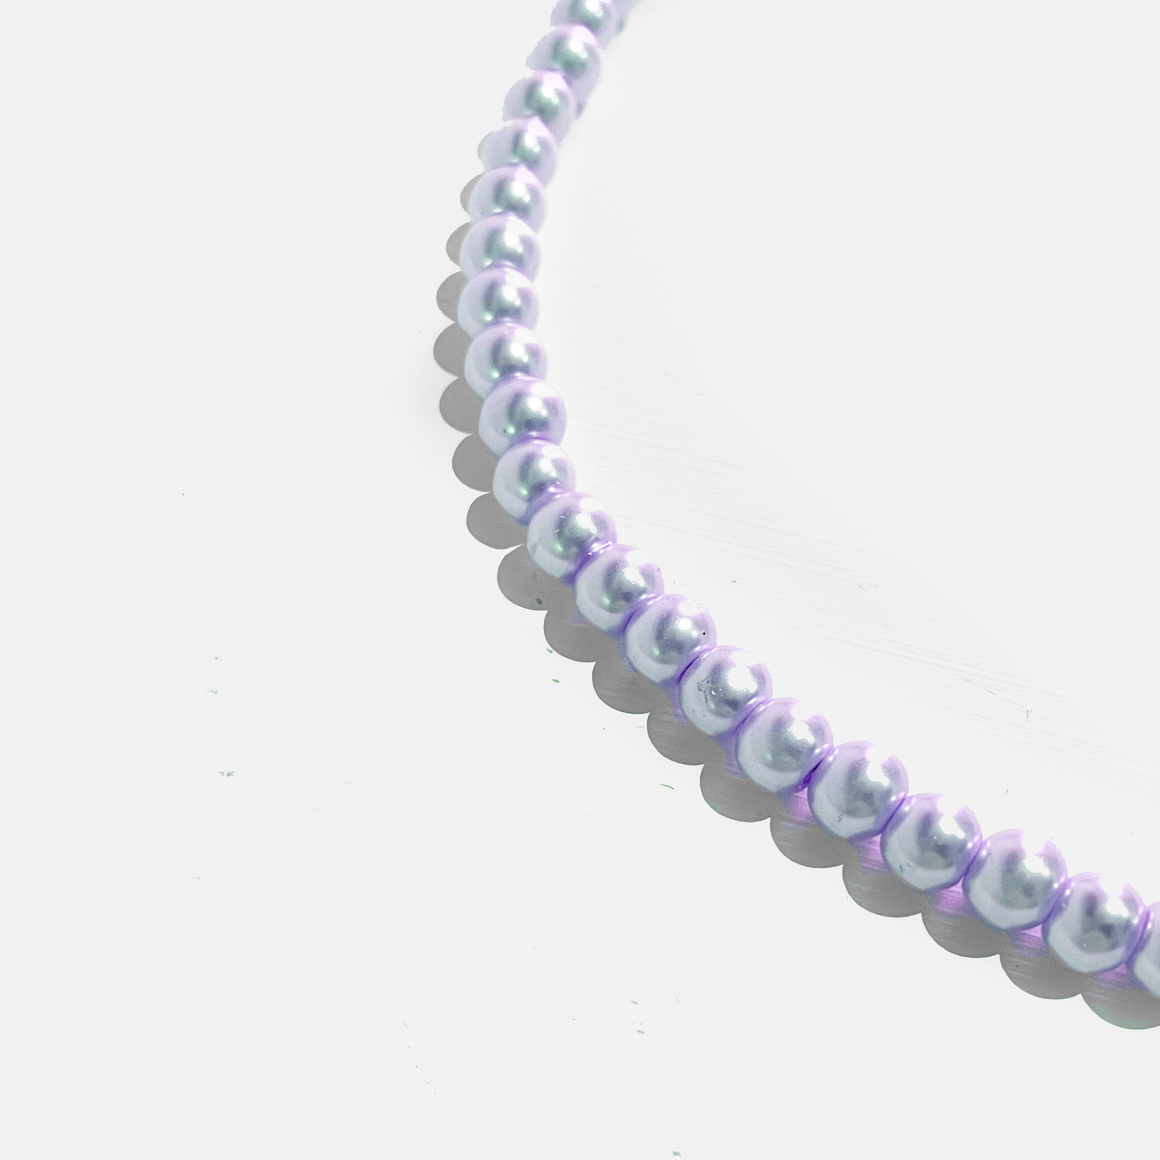 54 FLORAL 8mm PEARL NECKLACE BEAD NECKLACE CHAIN - PASTEL PURPLE